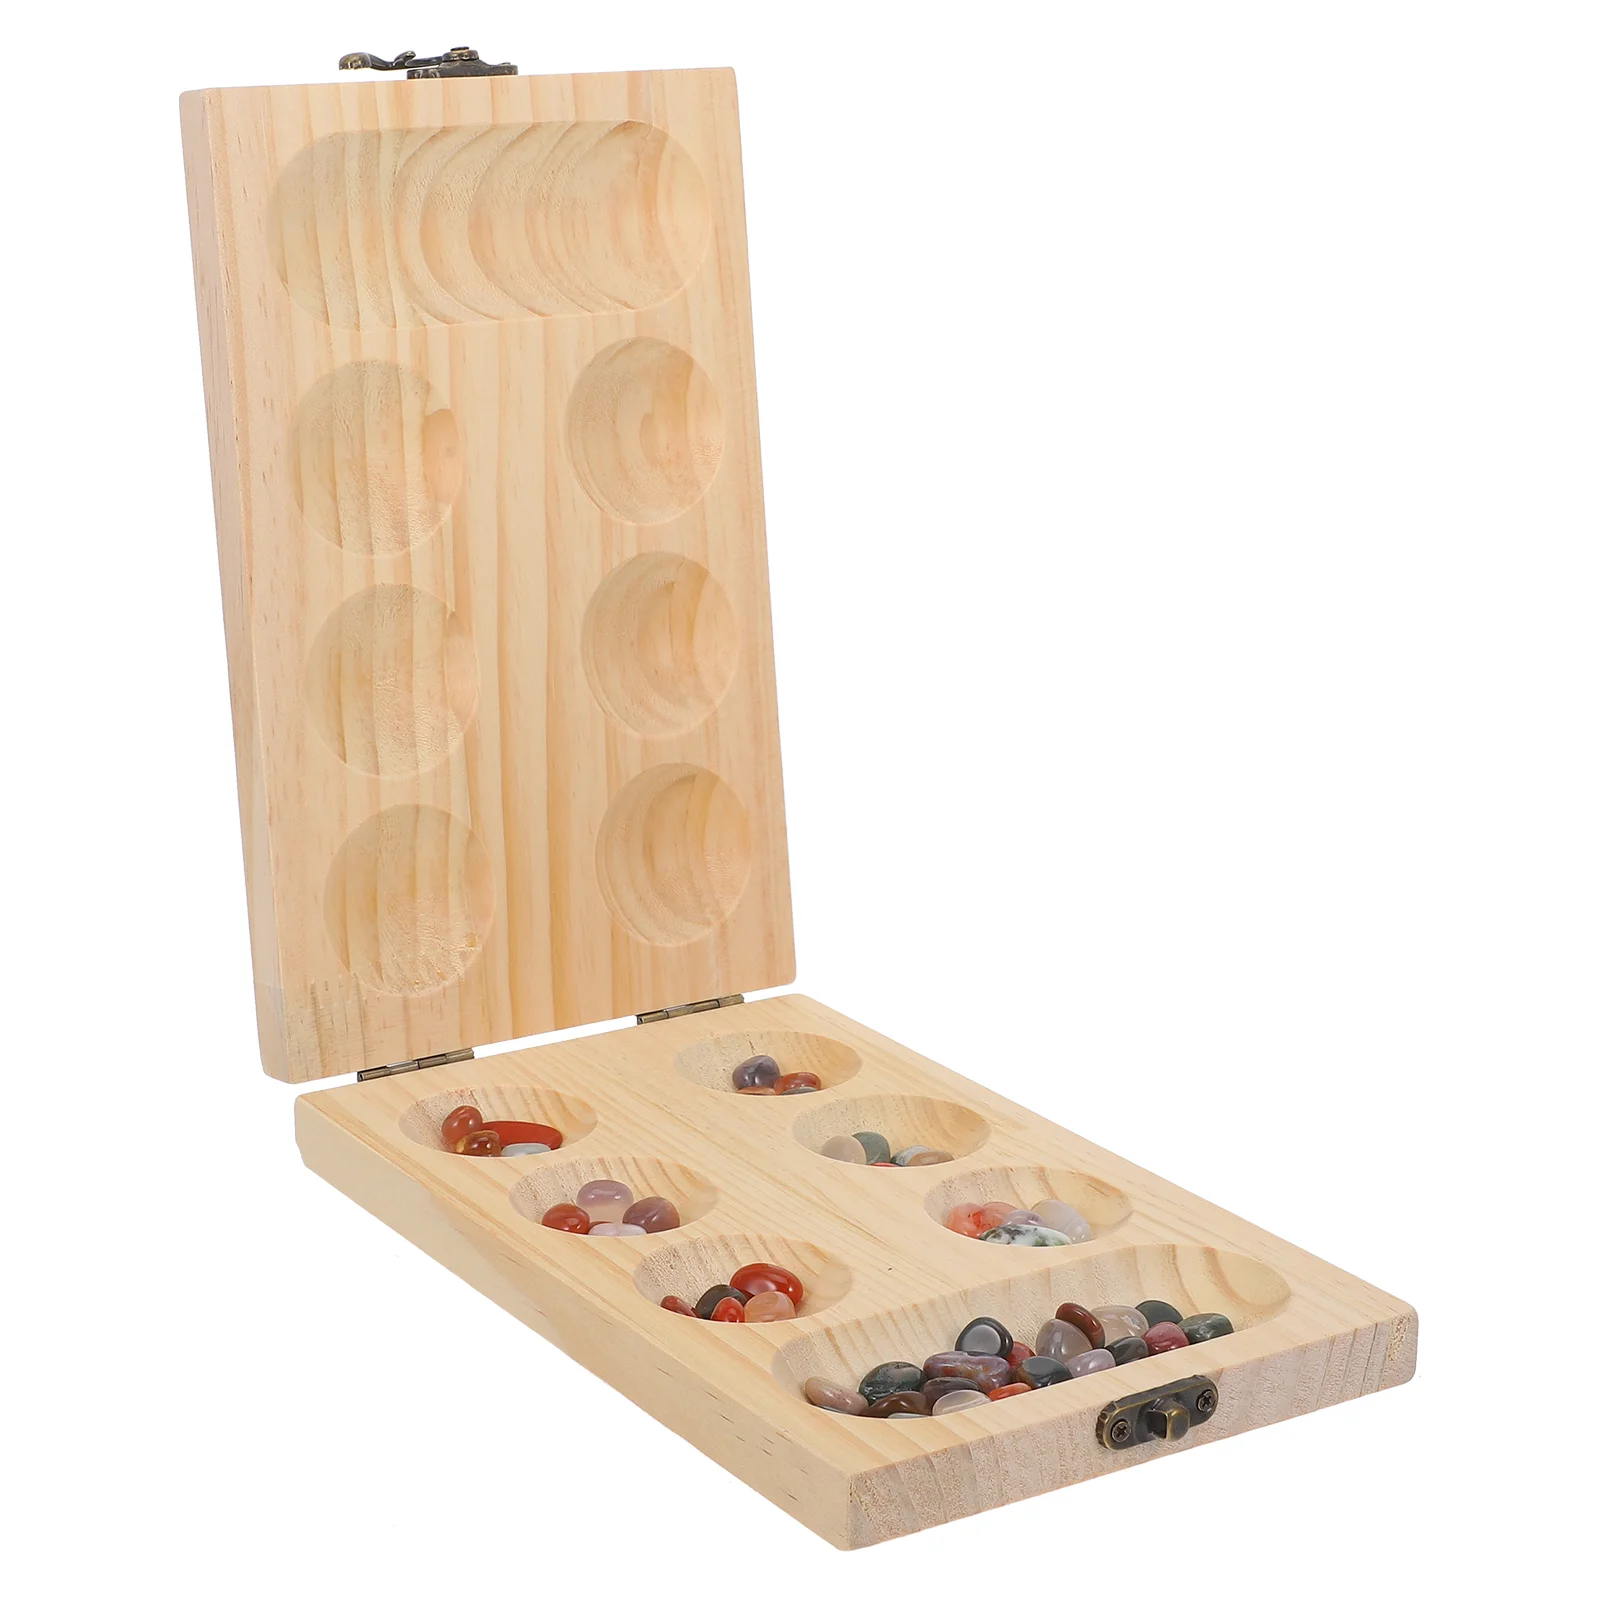 

Mancala Board Game with Stones Wooden Portable Toy Thinking Puzzle Travel Chess Classic Child